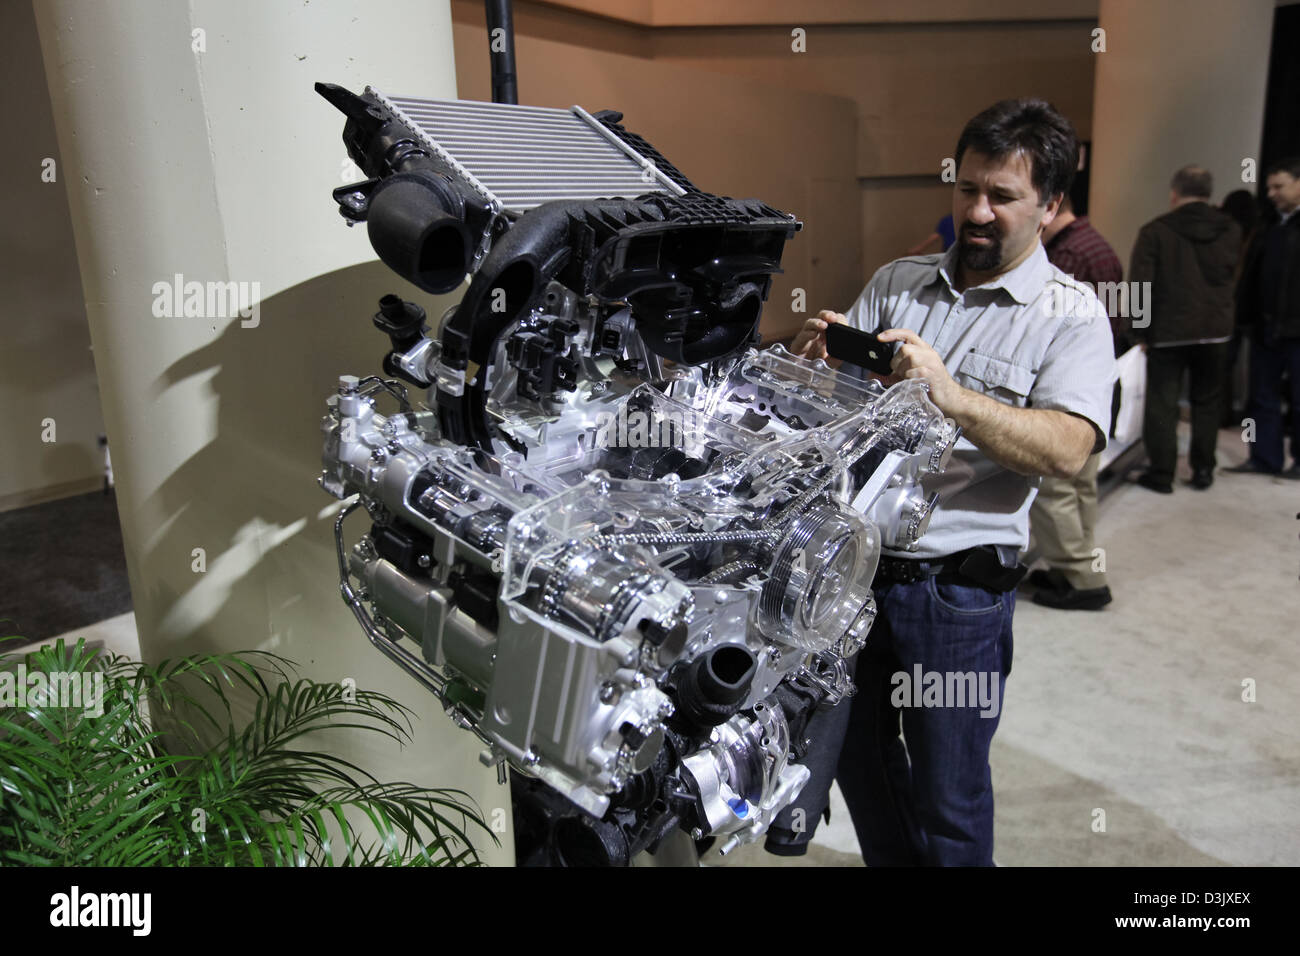 man taking picture car engine Stock Photo